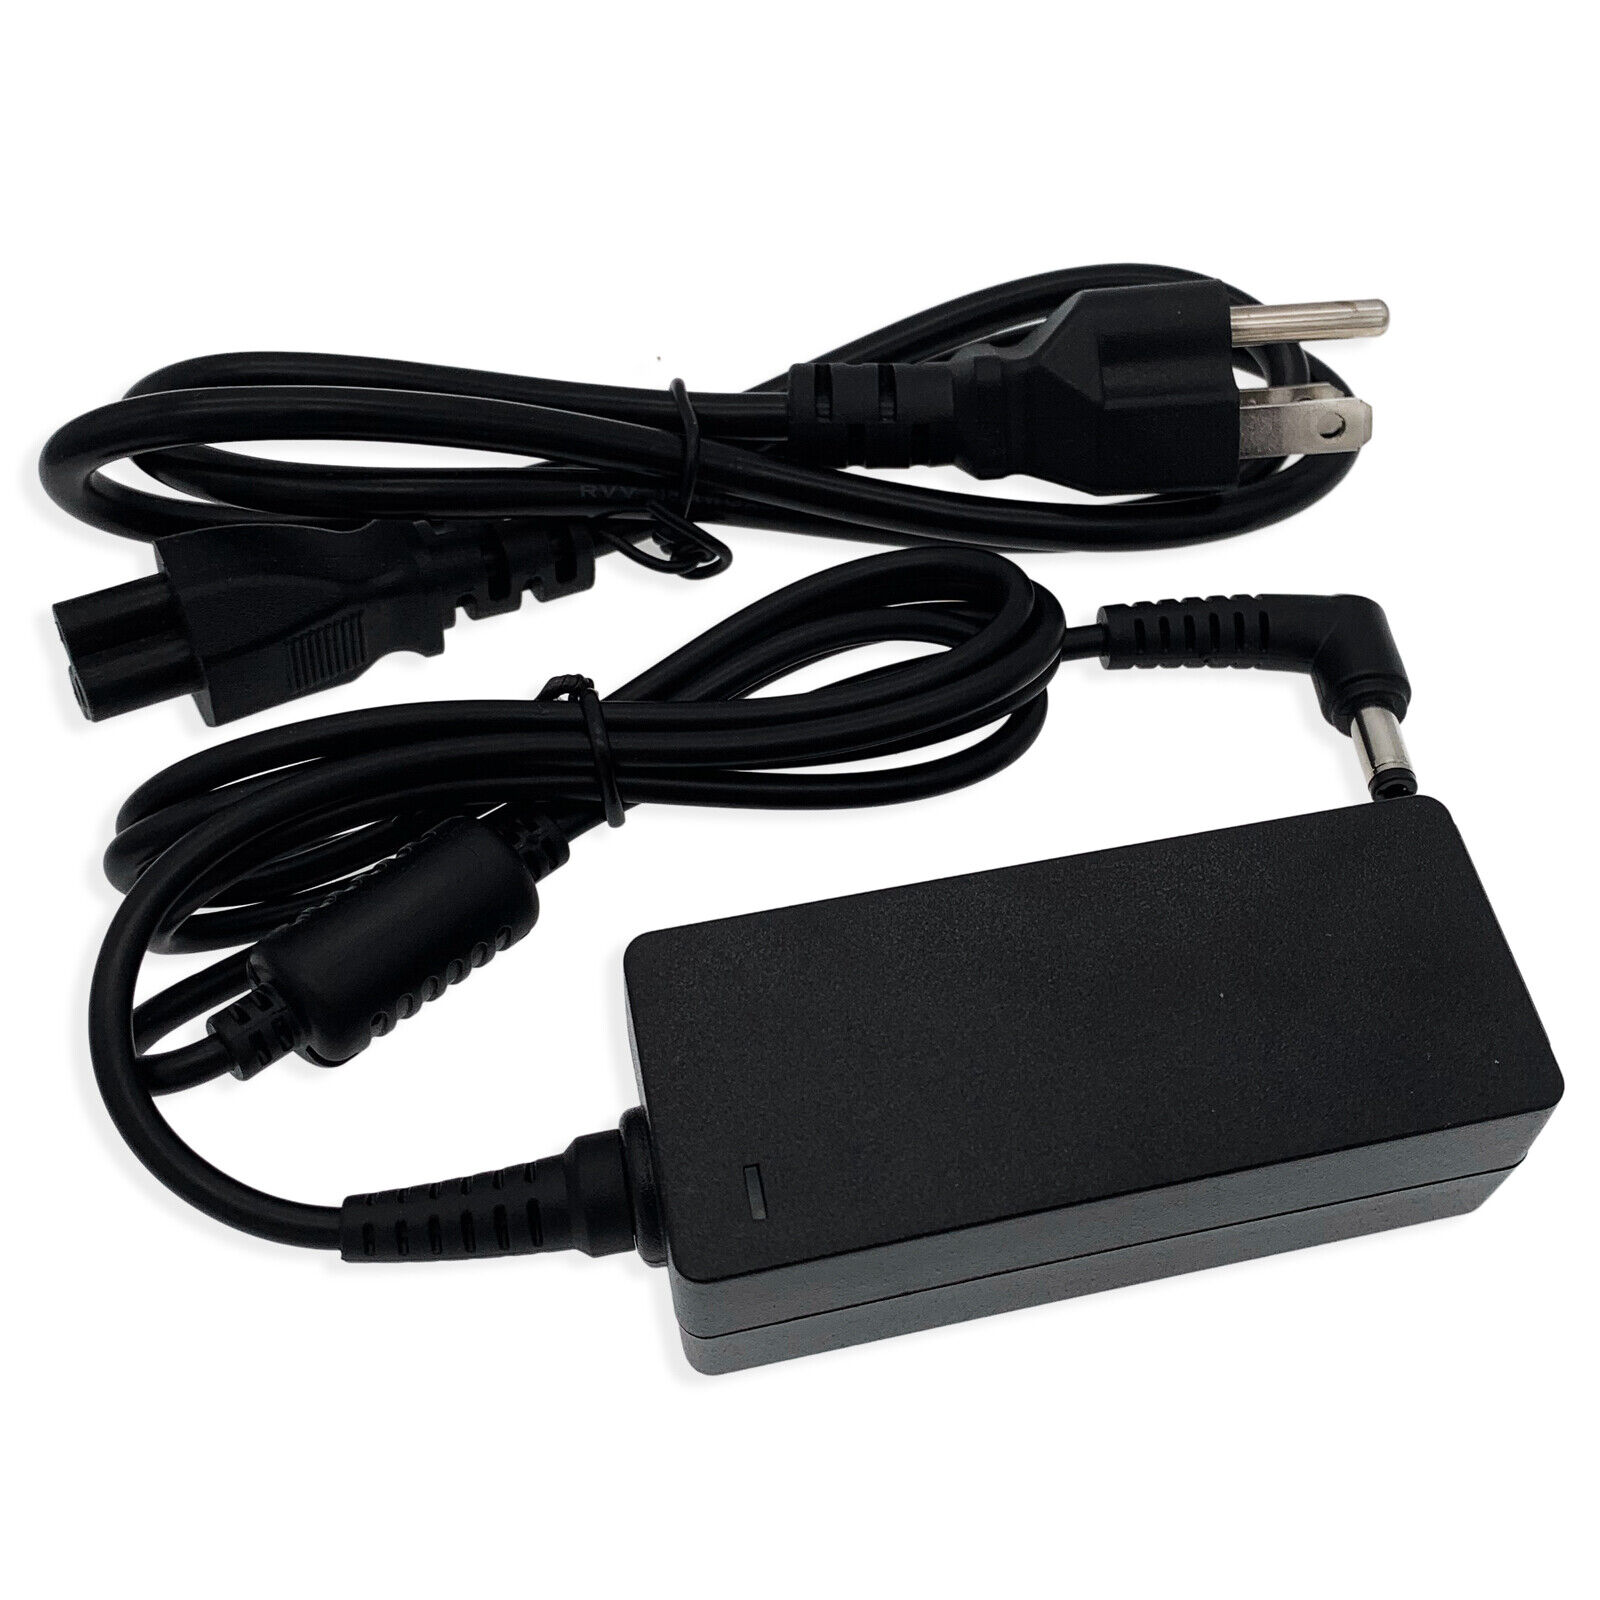 24V AC/DC Adapter Charger for Samsung HW-F550 HW-F551 HW-FM35 HW-FM55 HW-FM55C Series Crystal HW-F335 HW-F350 HW-F355 Su